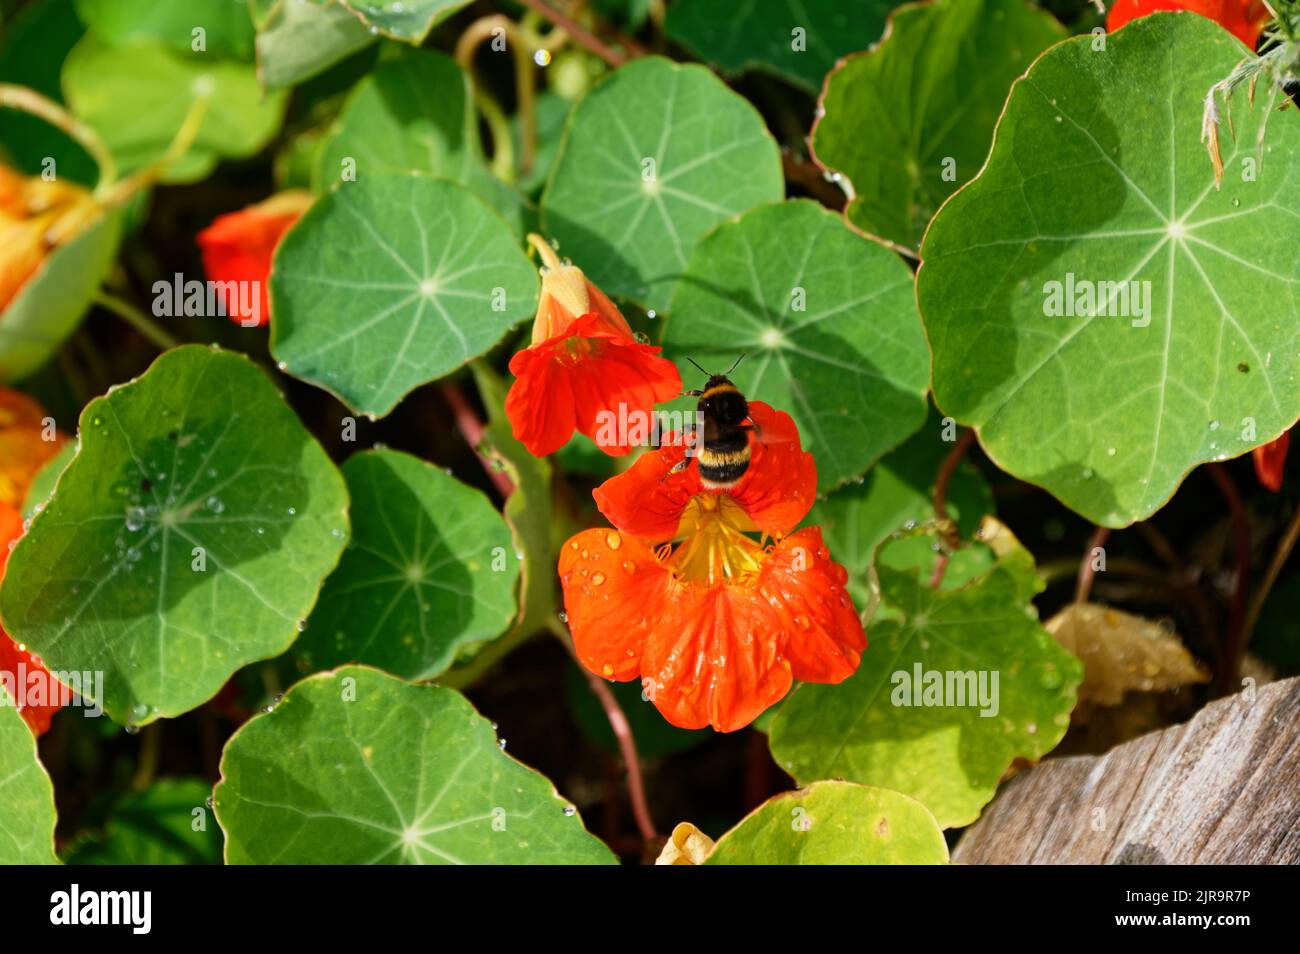 Take-off achieved, a bumble bee is flying away from an orange nasturtium flower Stock Photo